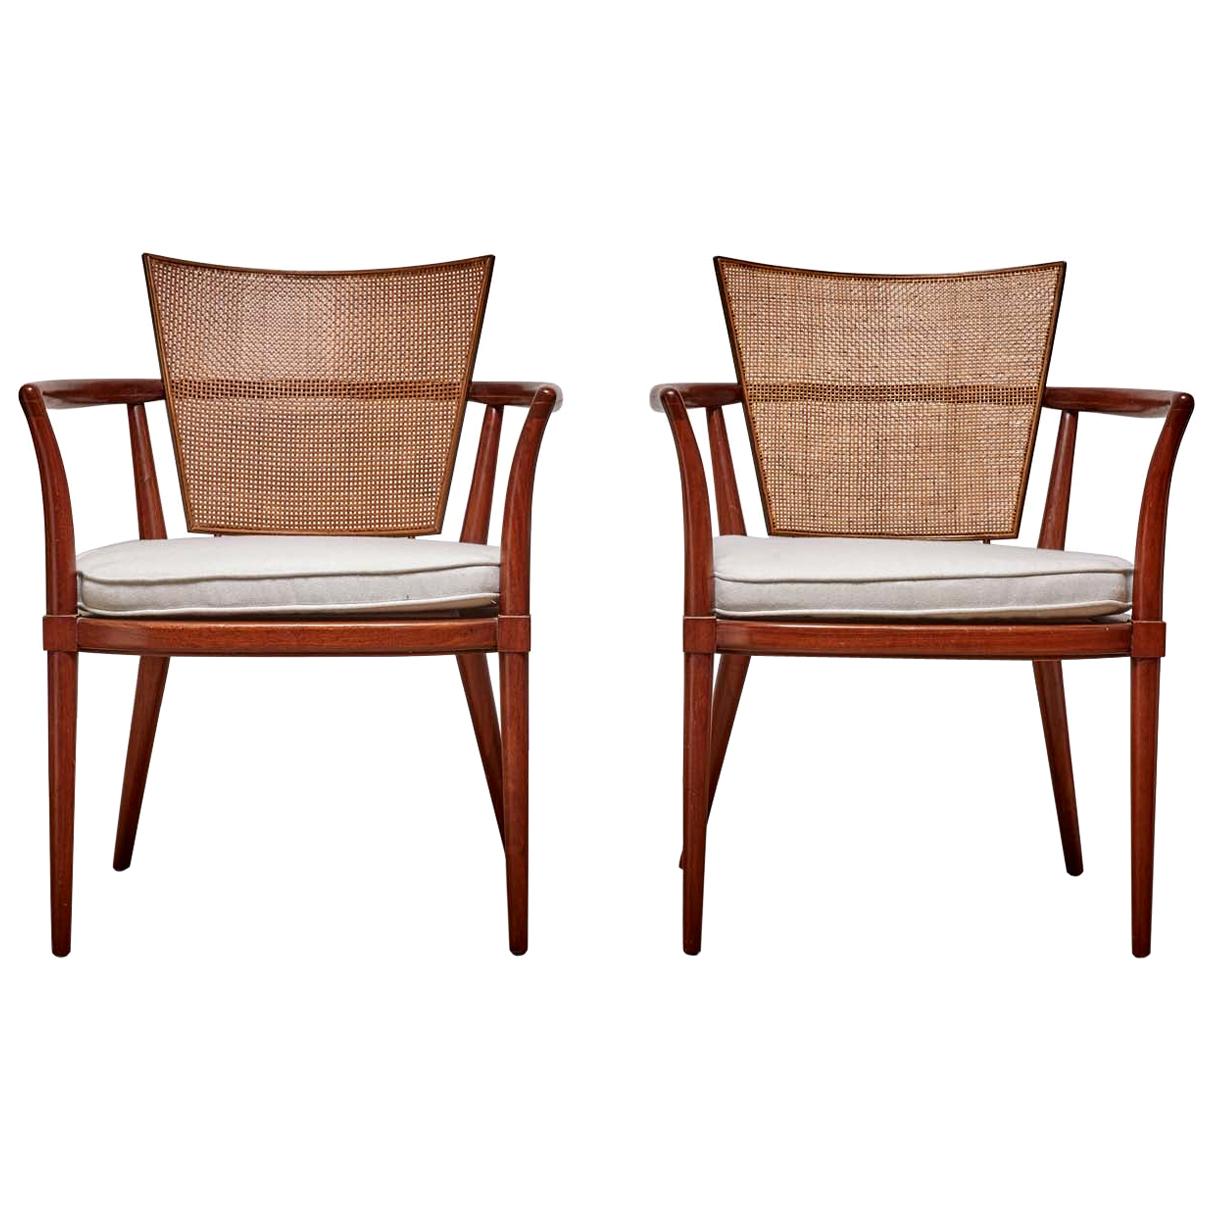 Pair of Vintage Cane Back Chairs by Bert England